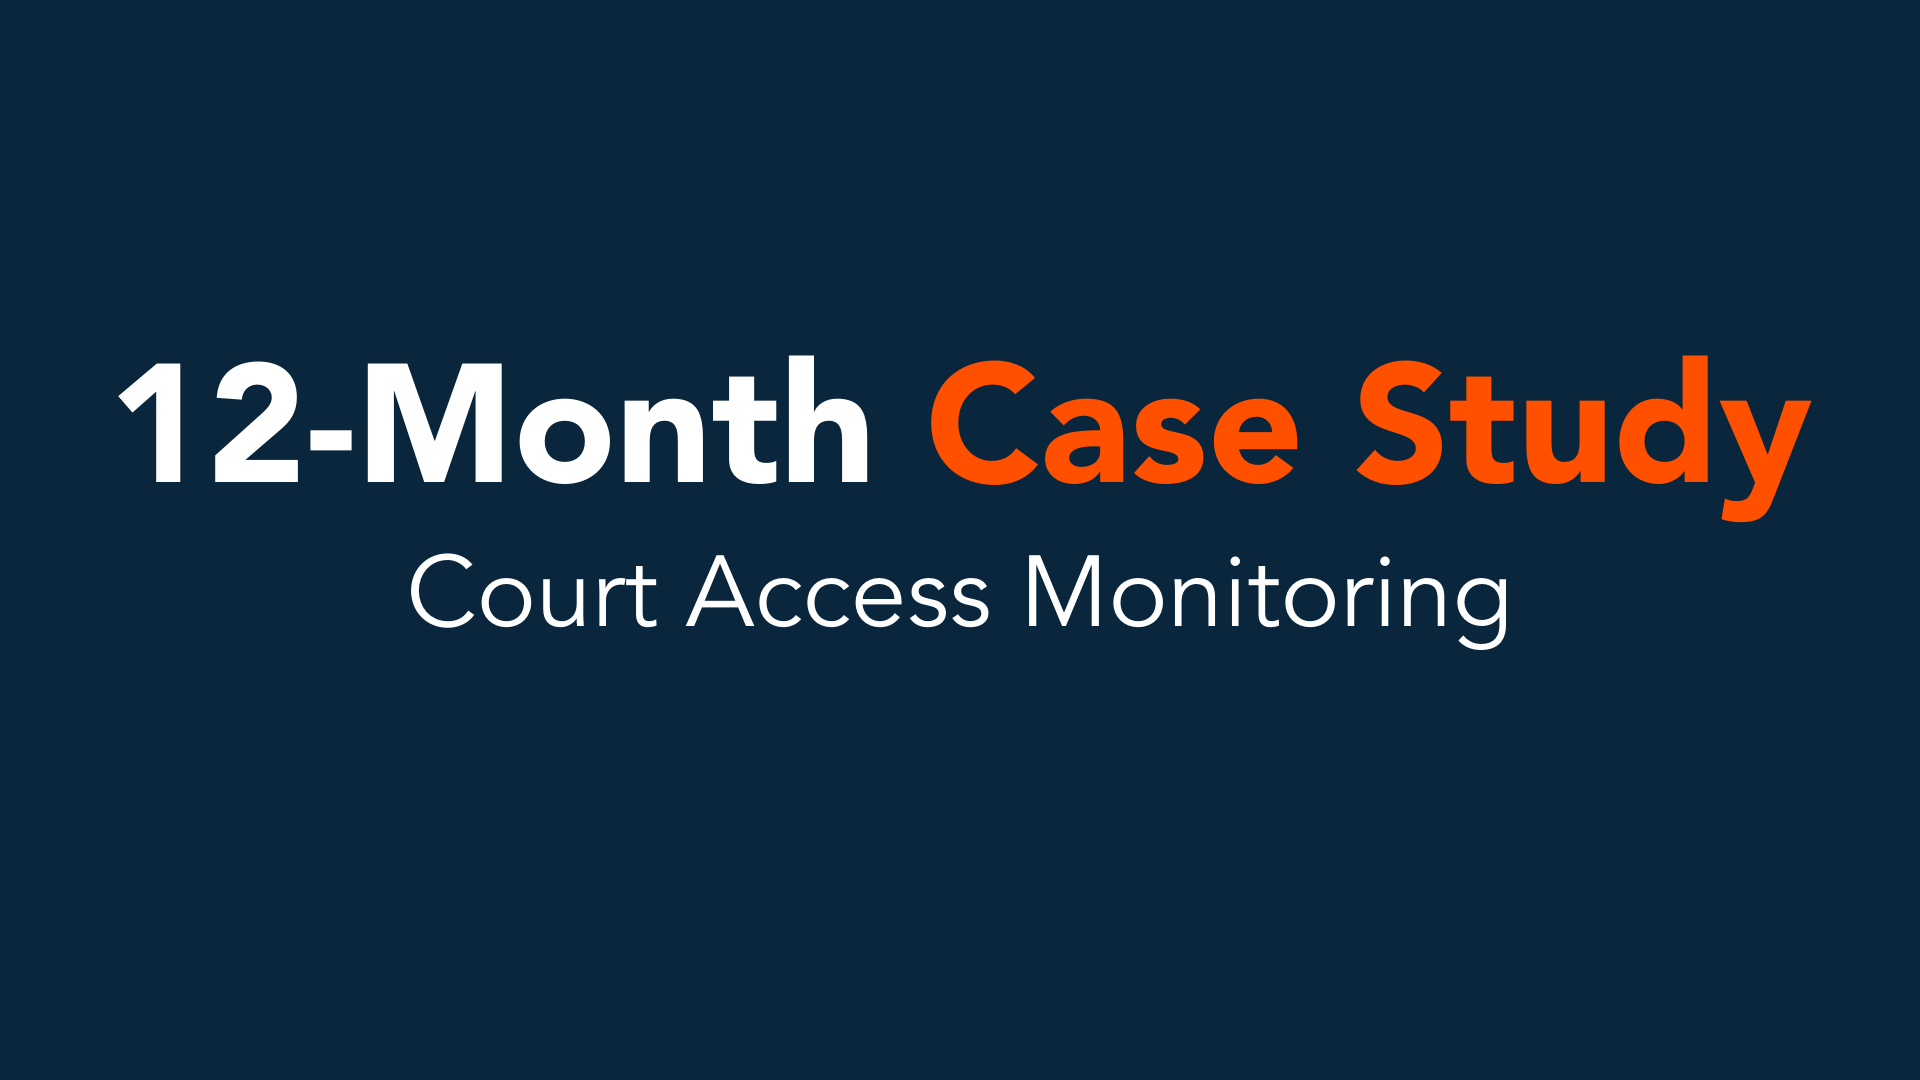 The Risk of Negligent Retention: A 12-Month Case Study on Continuous Monitoring